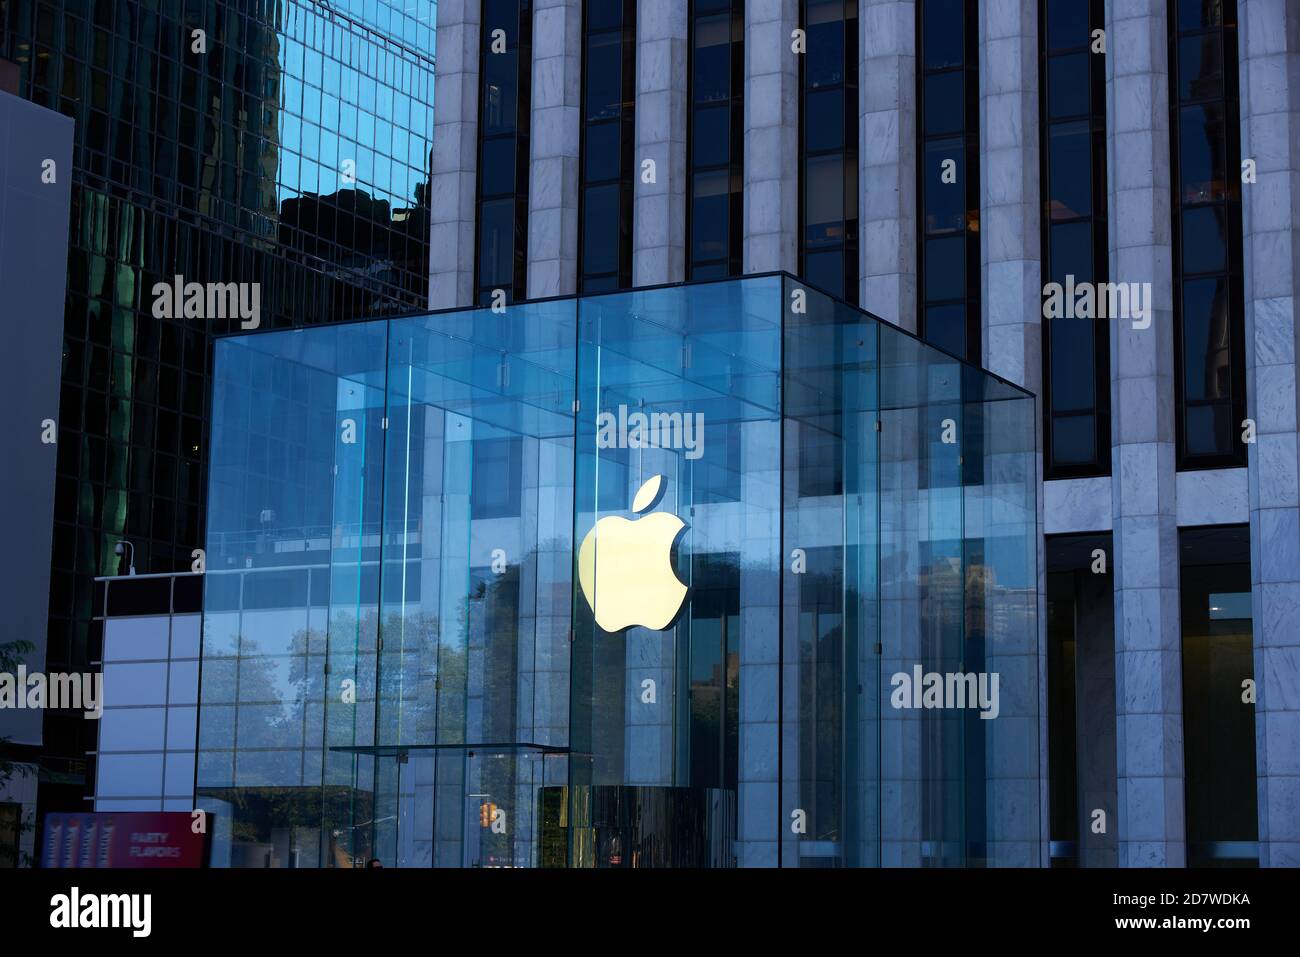 New York, NY - October 14, 2020: The Apple logo is illuminated with a warm light on a dark day at the Apple Store on 5th Avenue, Manhattan. The glass Stock Photo